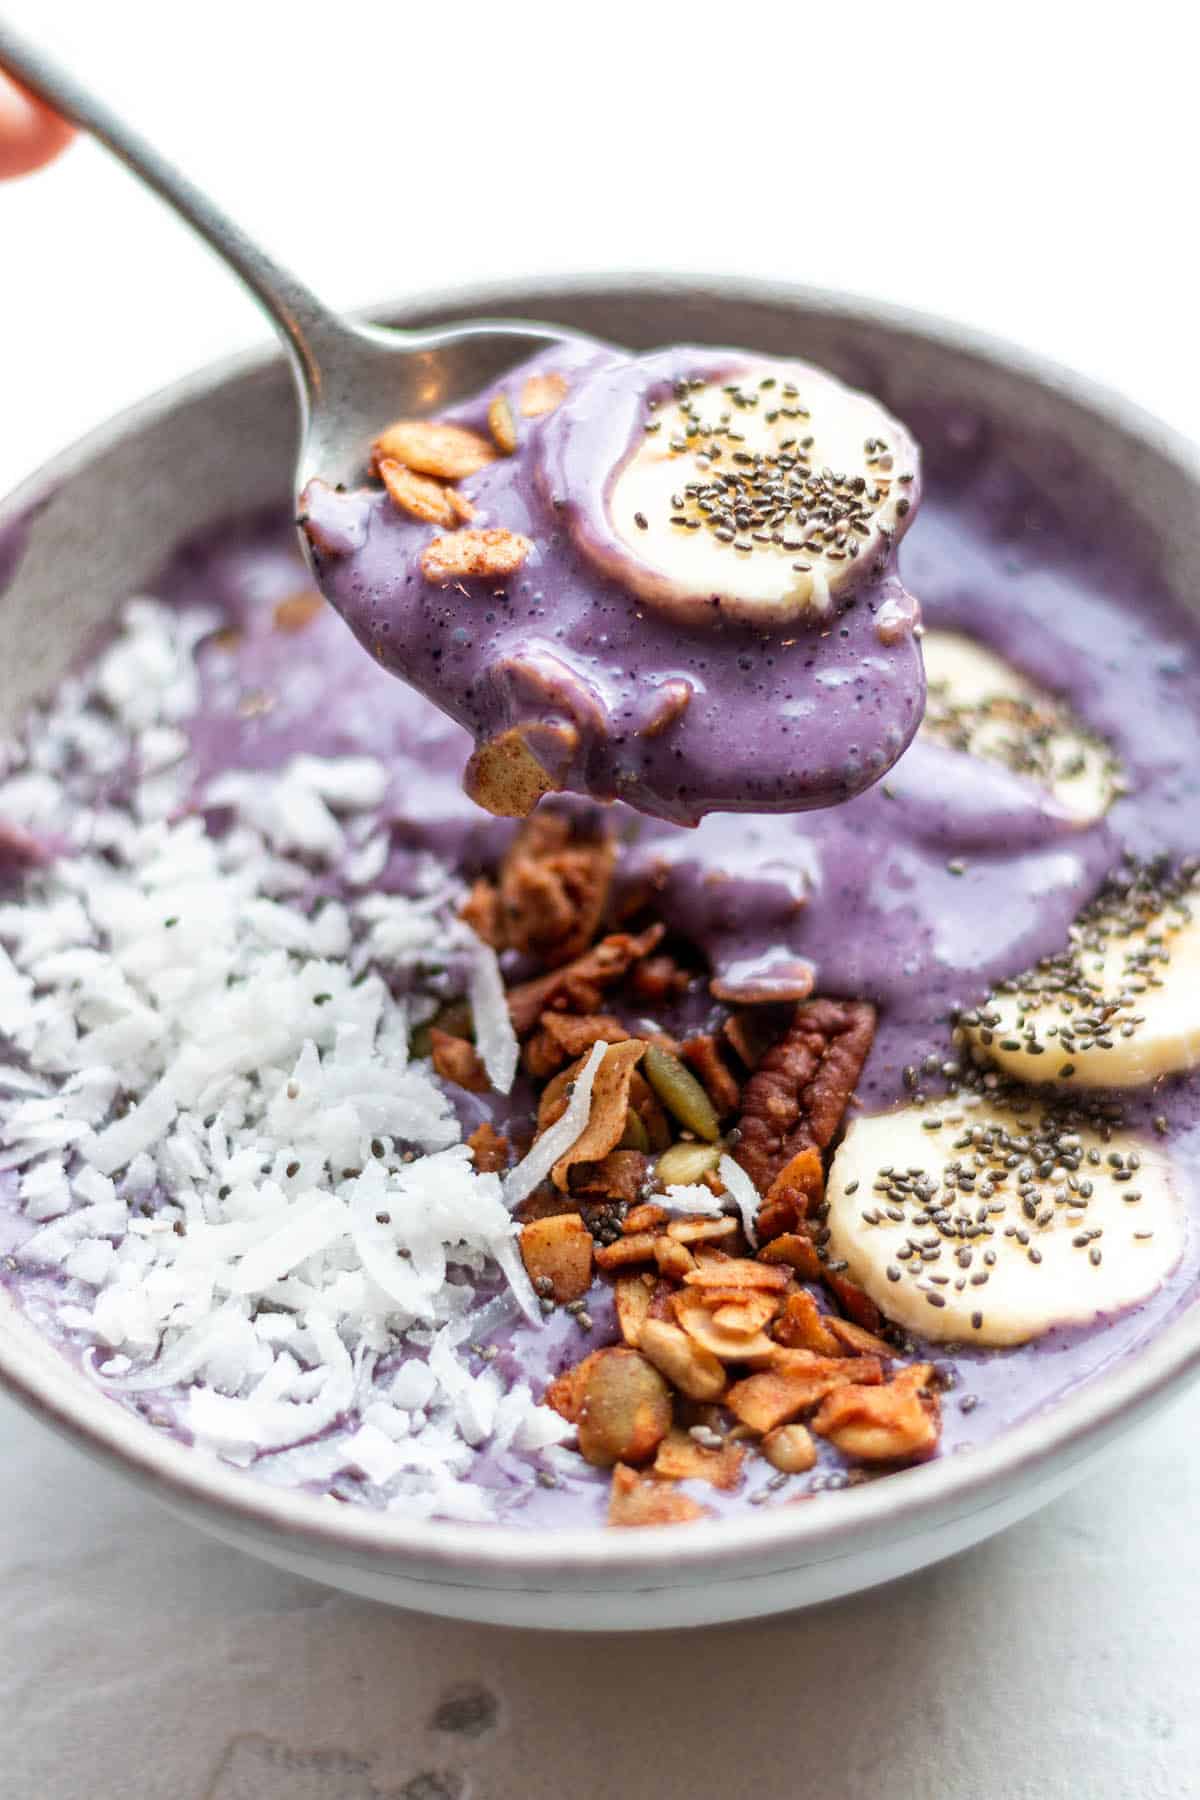 A spoon scooping out a purple smoothie with a banana, chai seeds and granola.